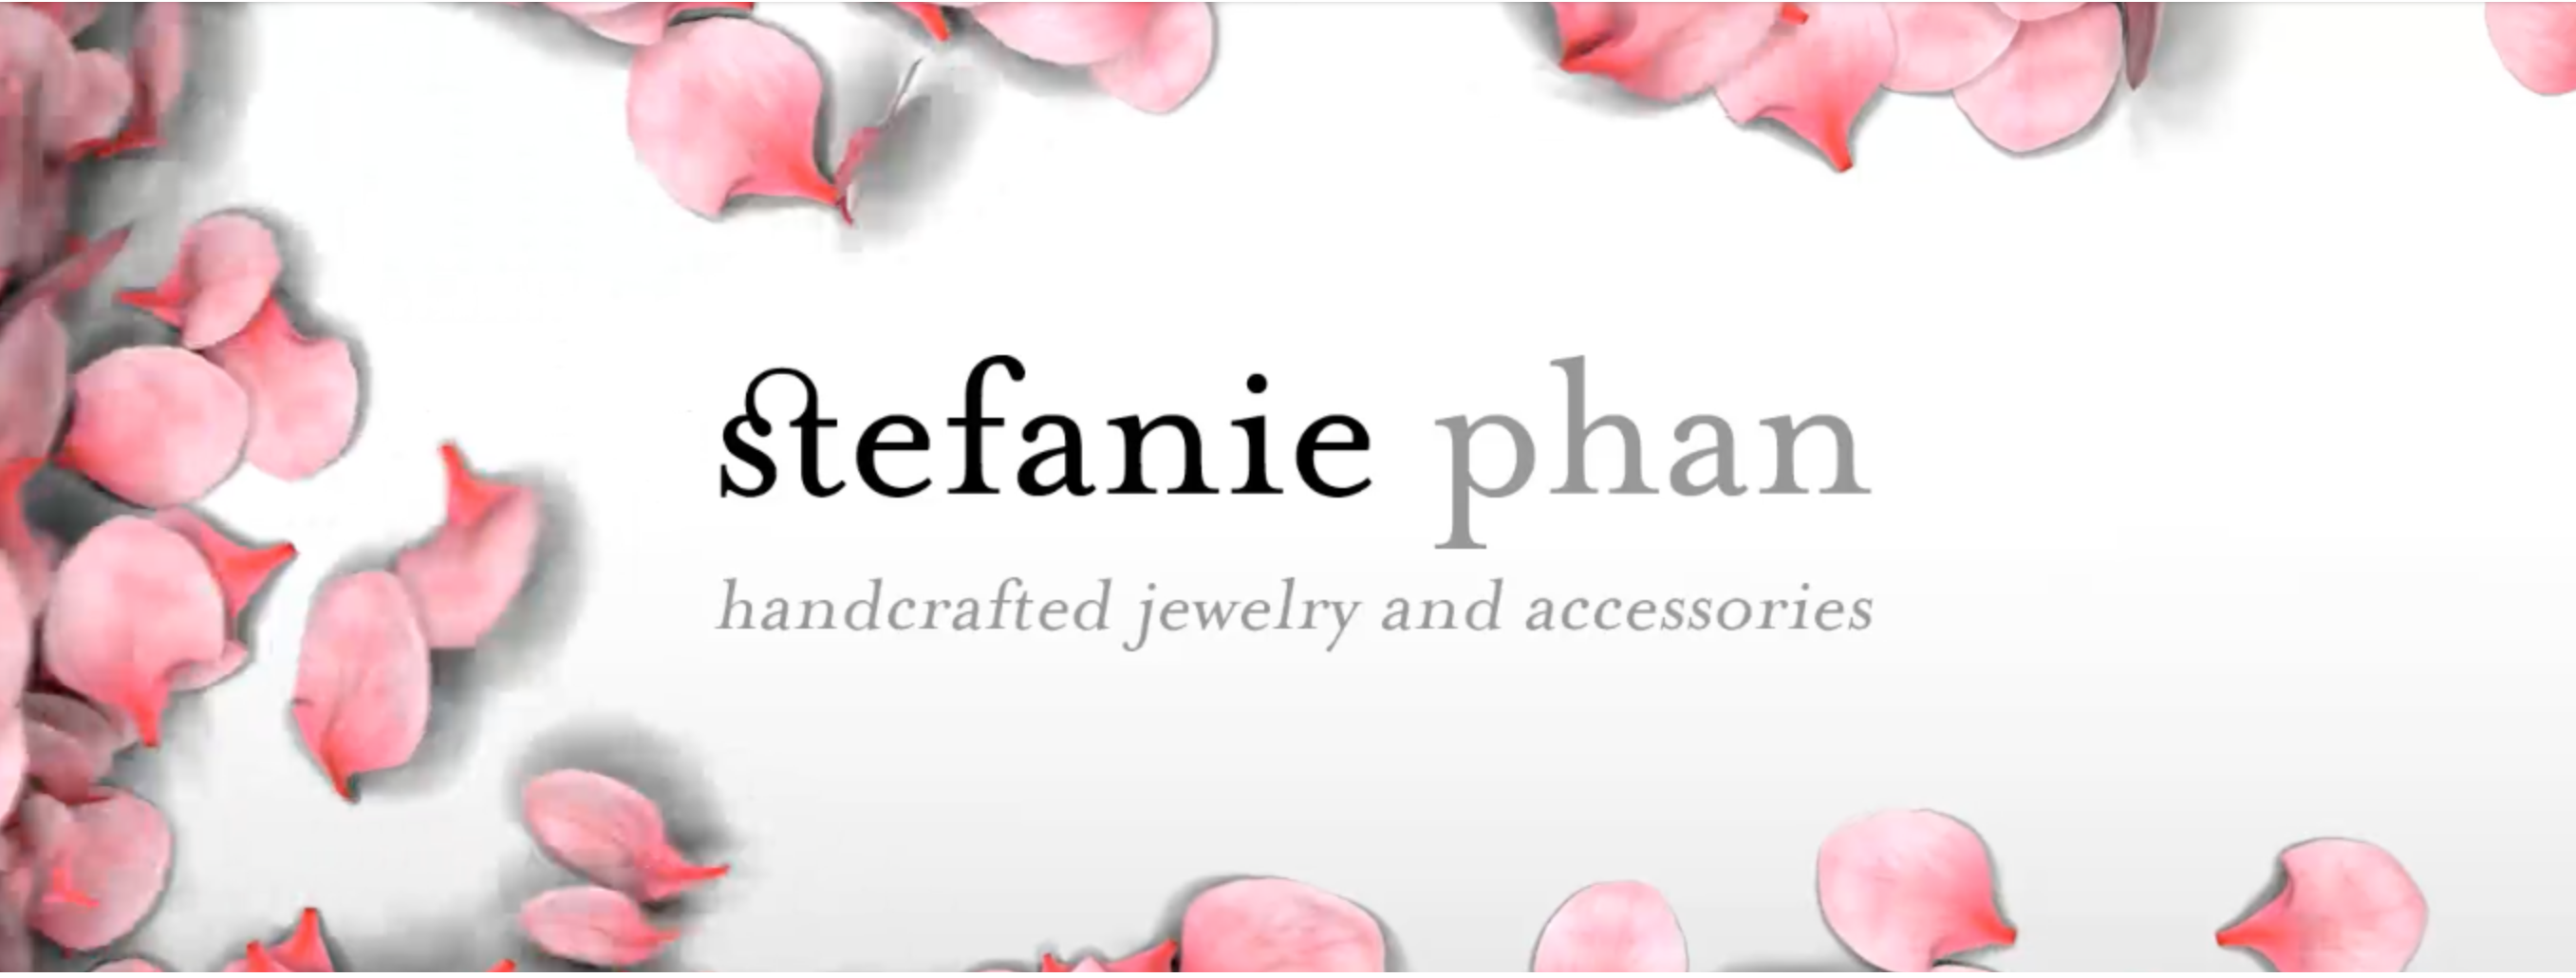 HANDCRAFTED COUTURE JEWELRY AND ACCESSORIES: STEFANIE PHAN LAUNCHES NEW WEBSITE